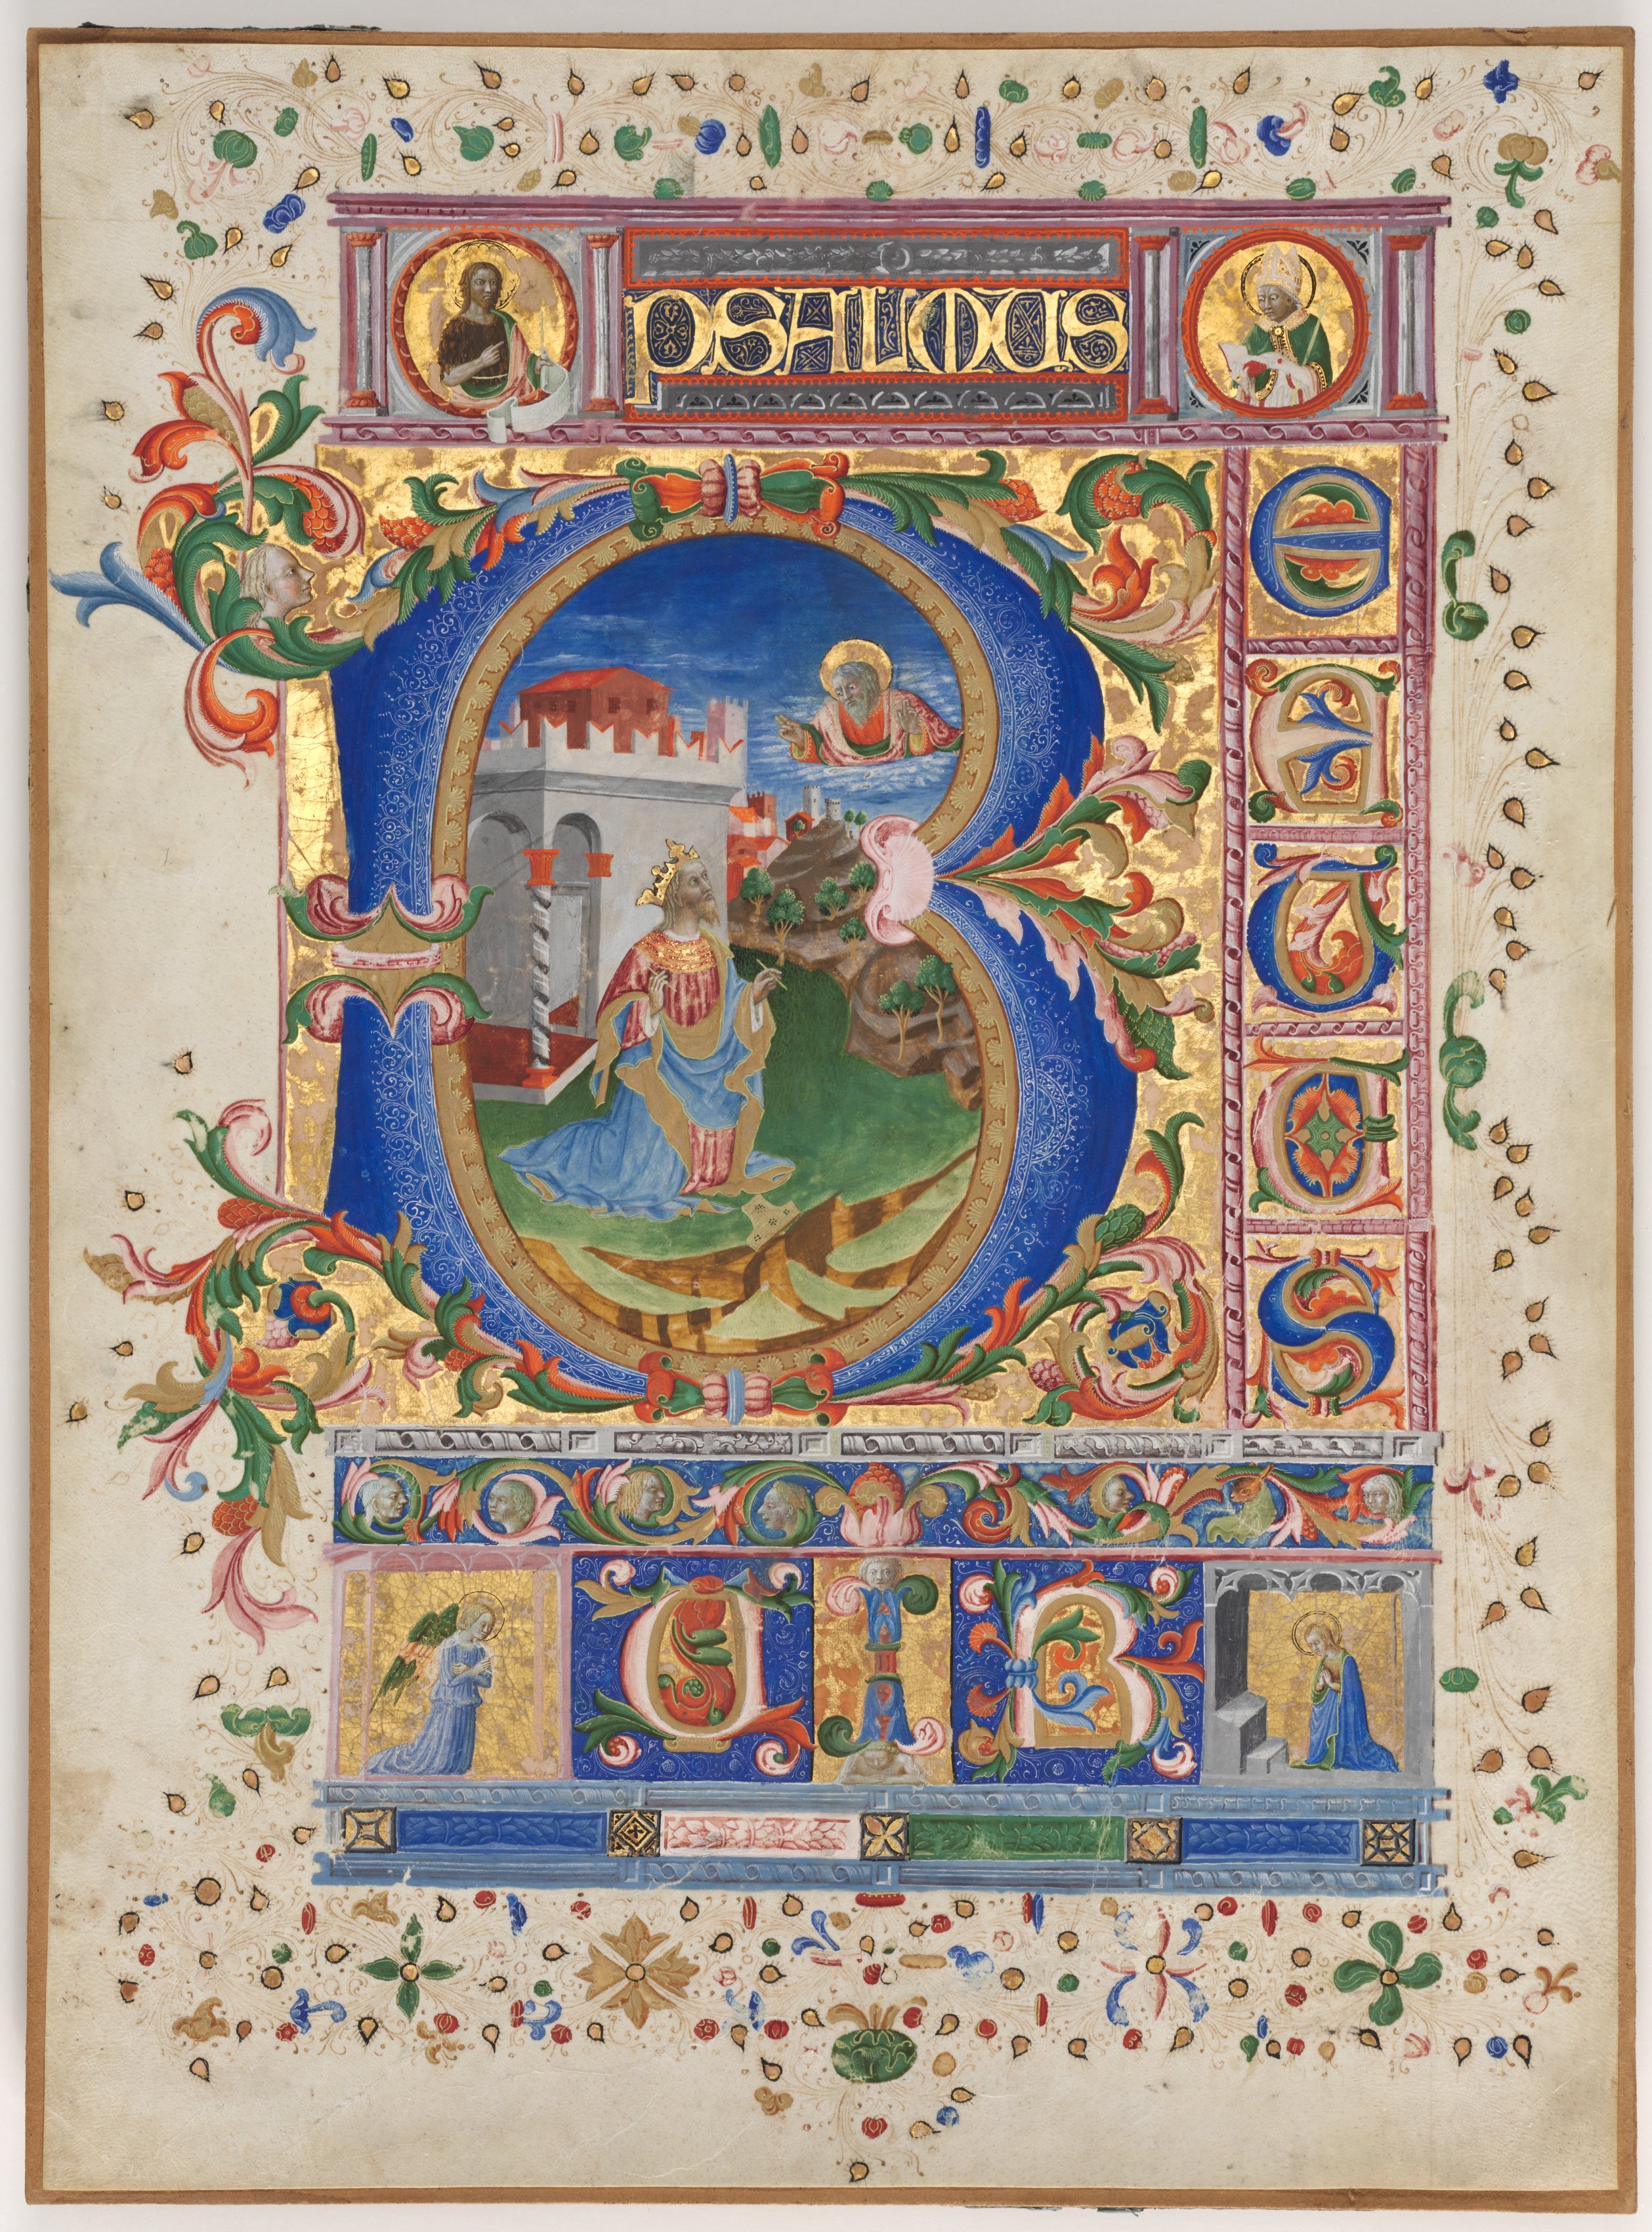 Leaf from a Psalter with Historiated Initial (B): King David